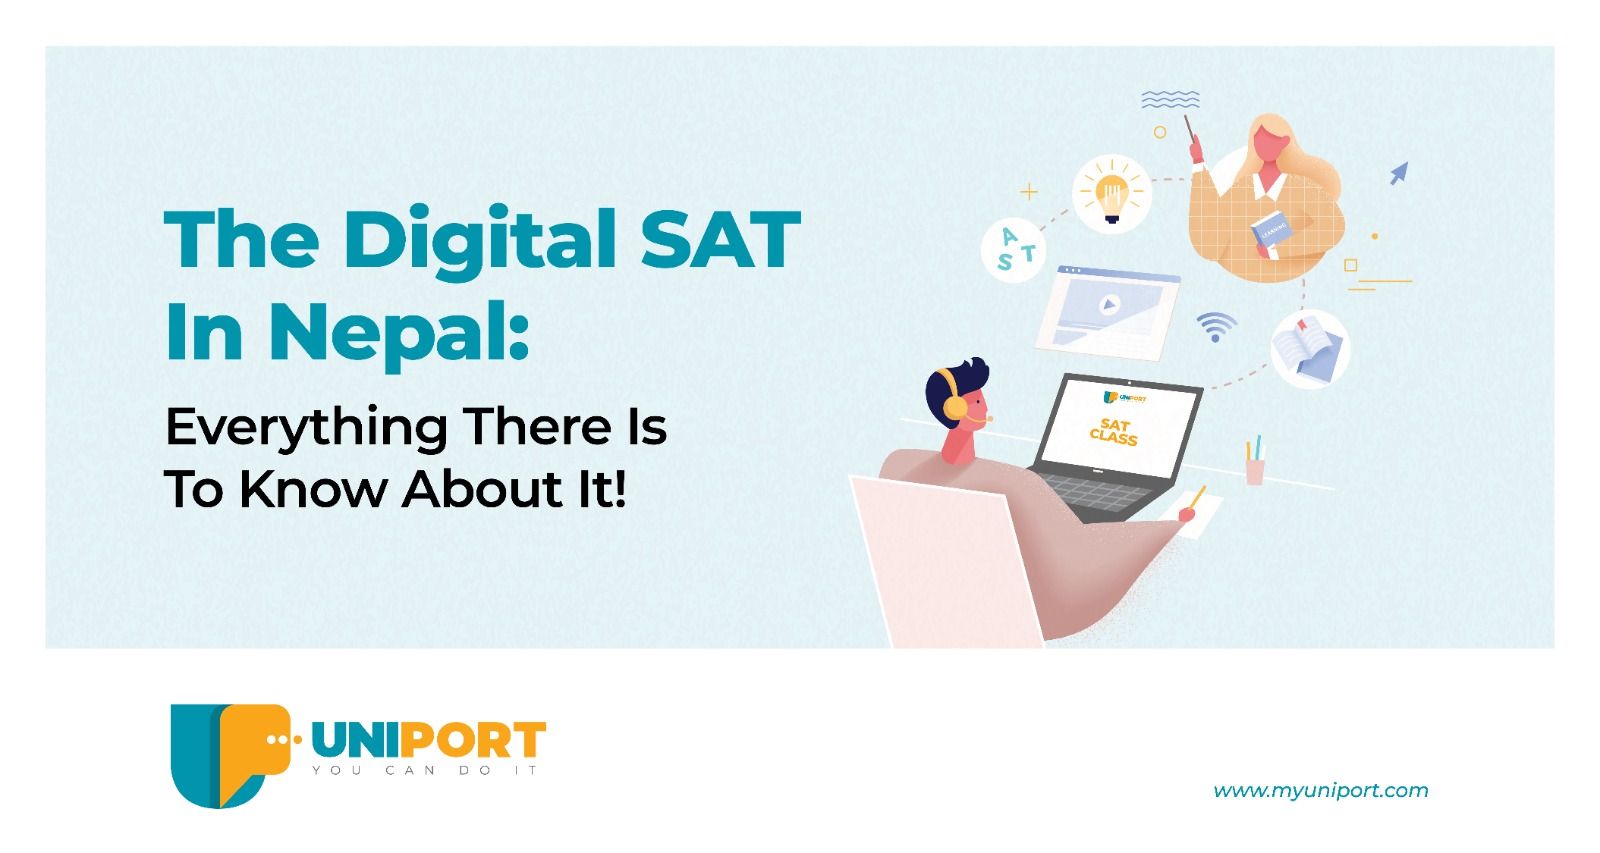 The Digital SAT In Nepal: Everything There Is To Know About It!